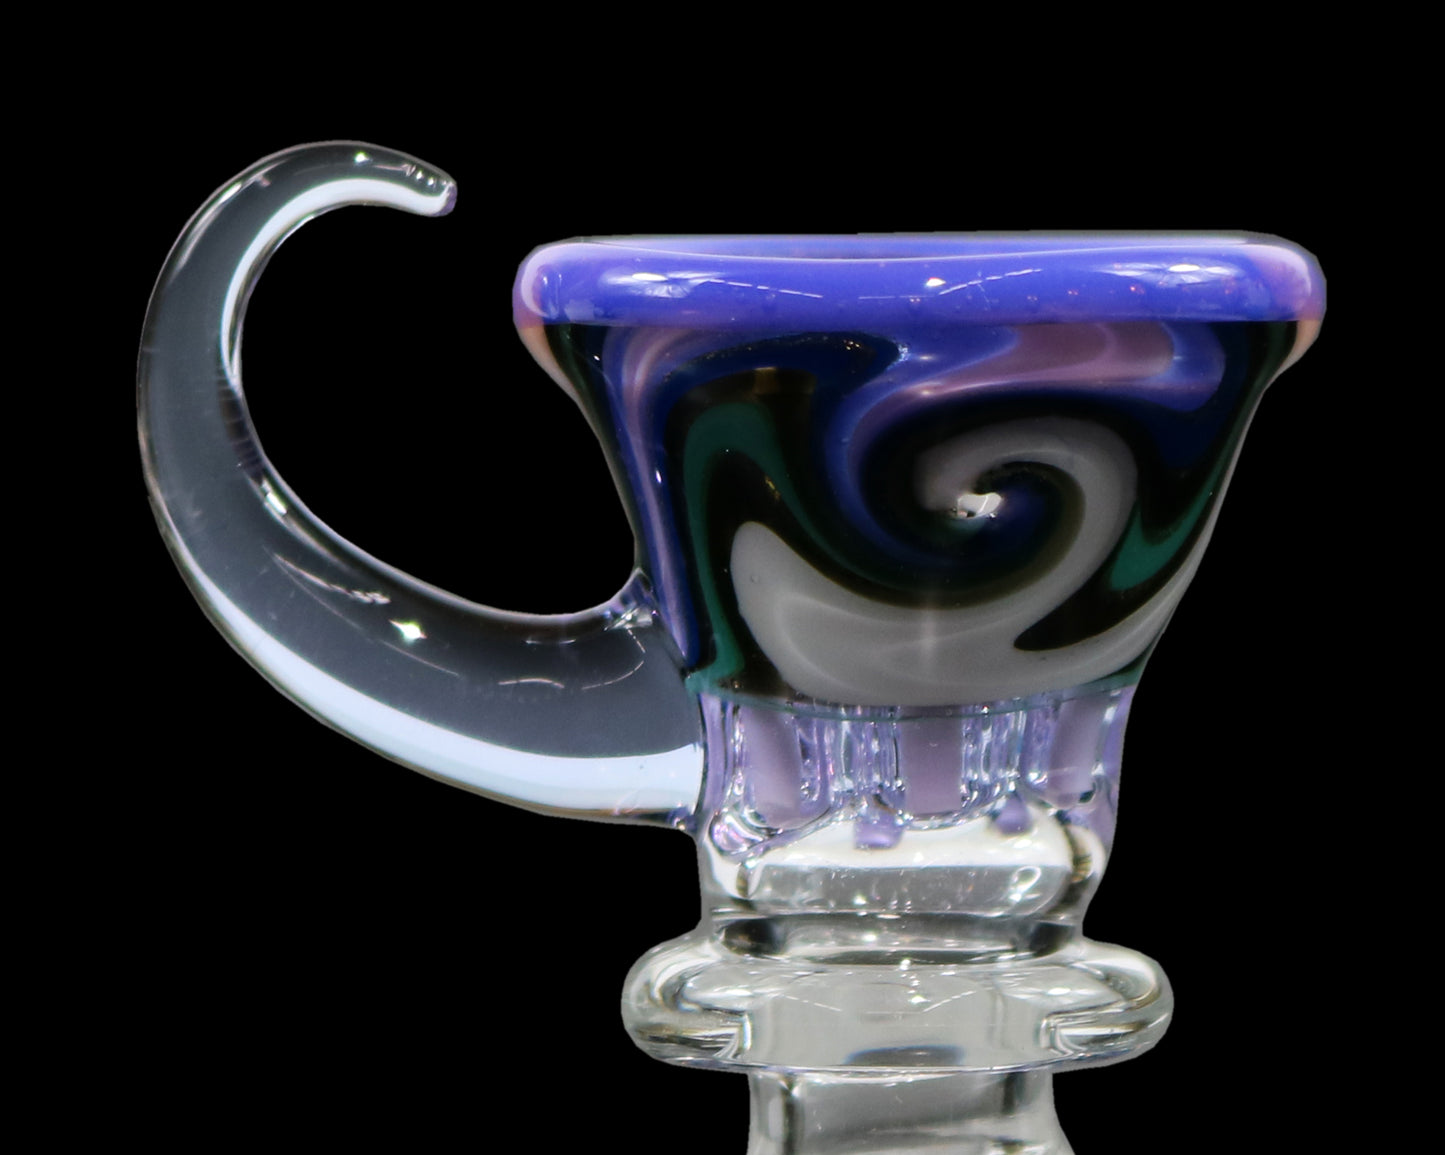 14mm Martini Slide with built in screen from Glass by Slick- Transparent Purple/Teal/White/Black/Dark Blue